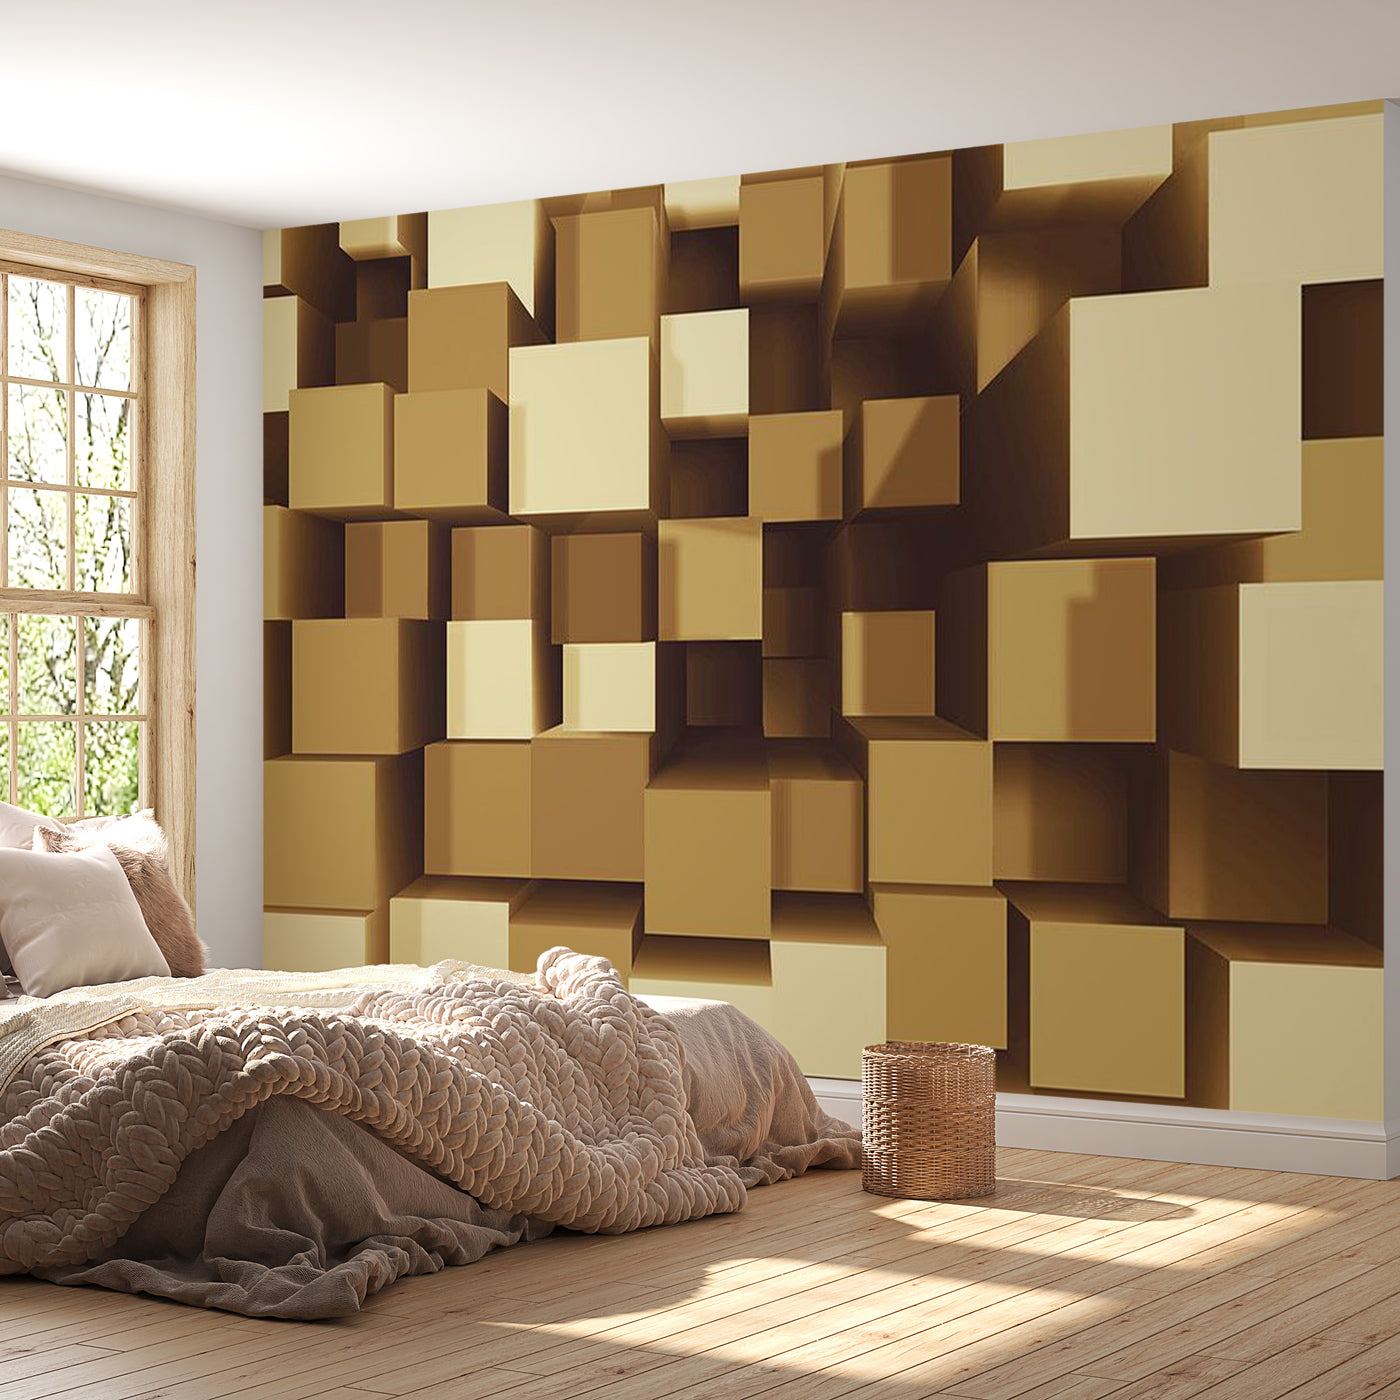 Peel & Stick 3D Illusion Wall Mural - Big Golden Blocks - Removable Wall Decals